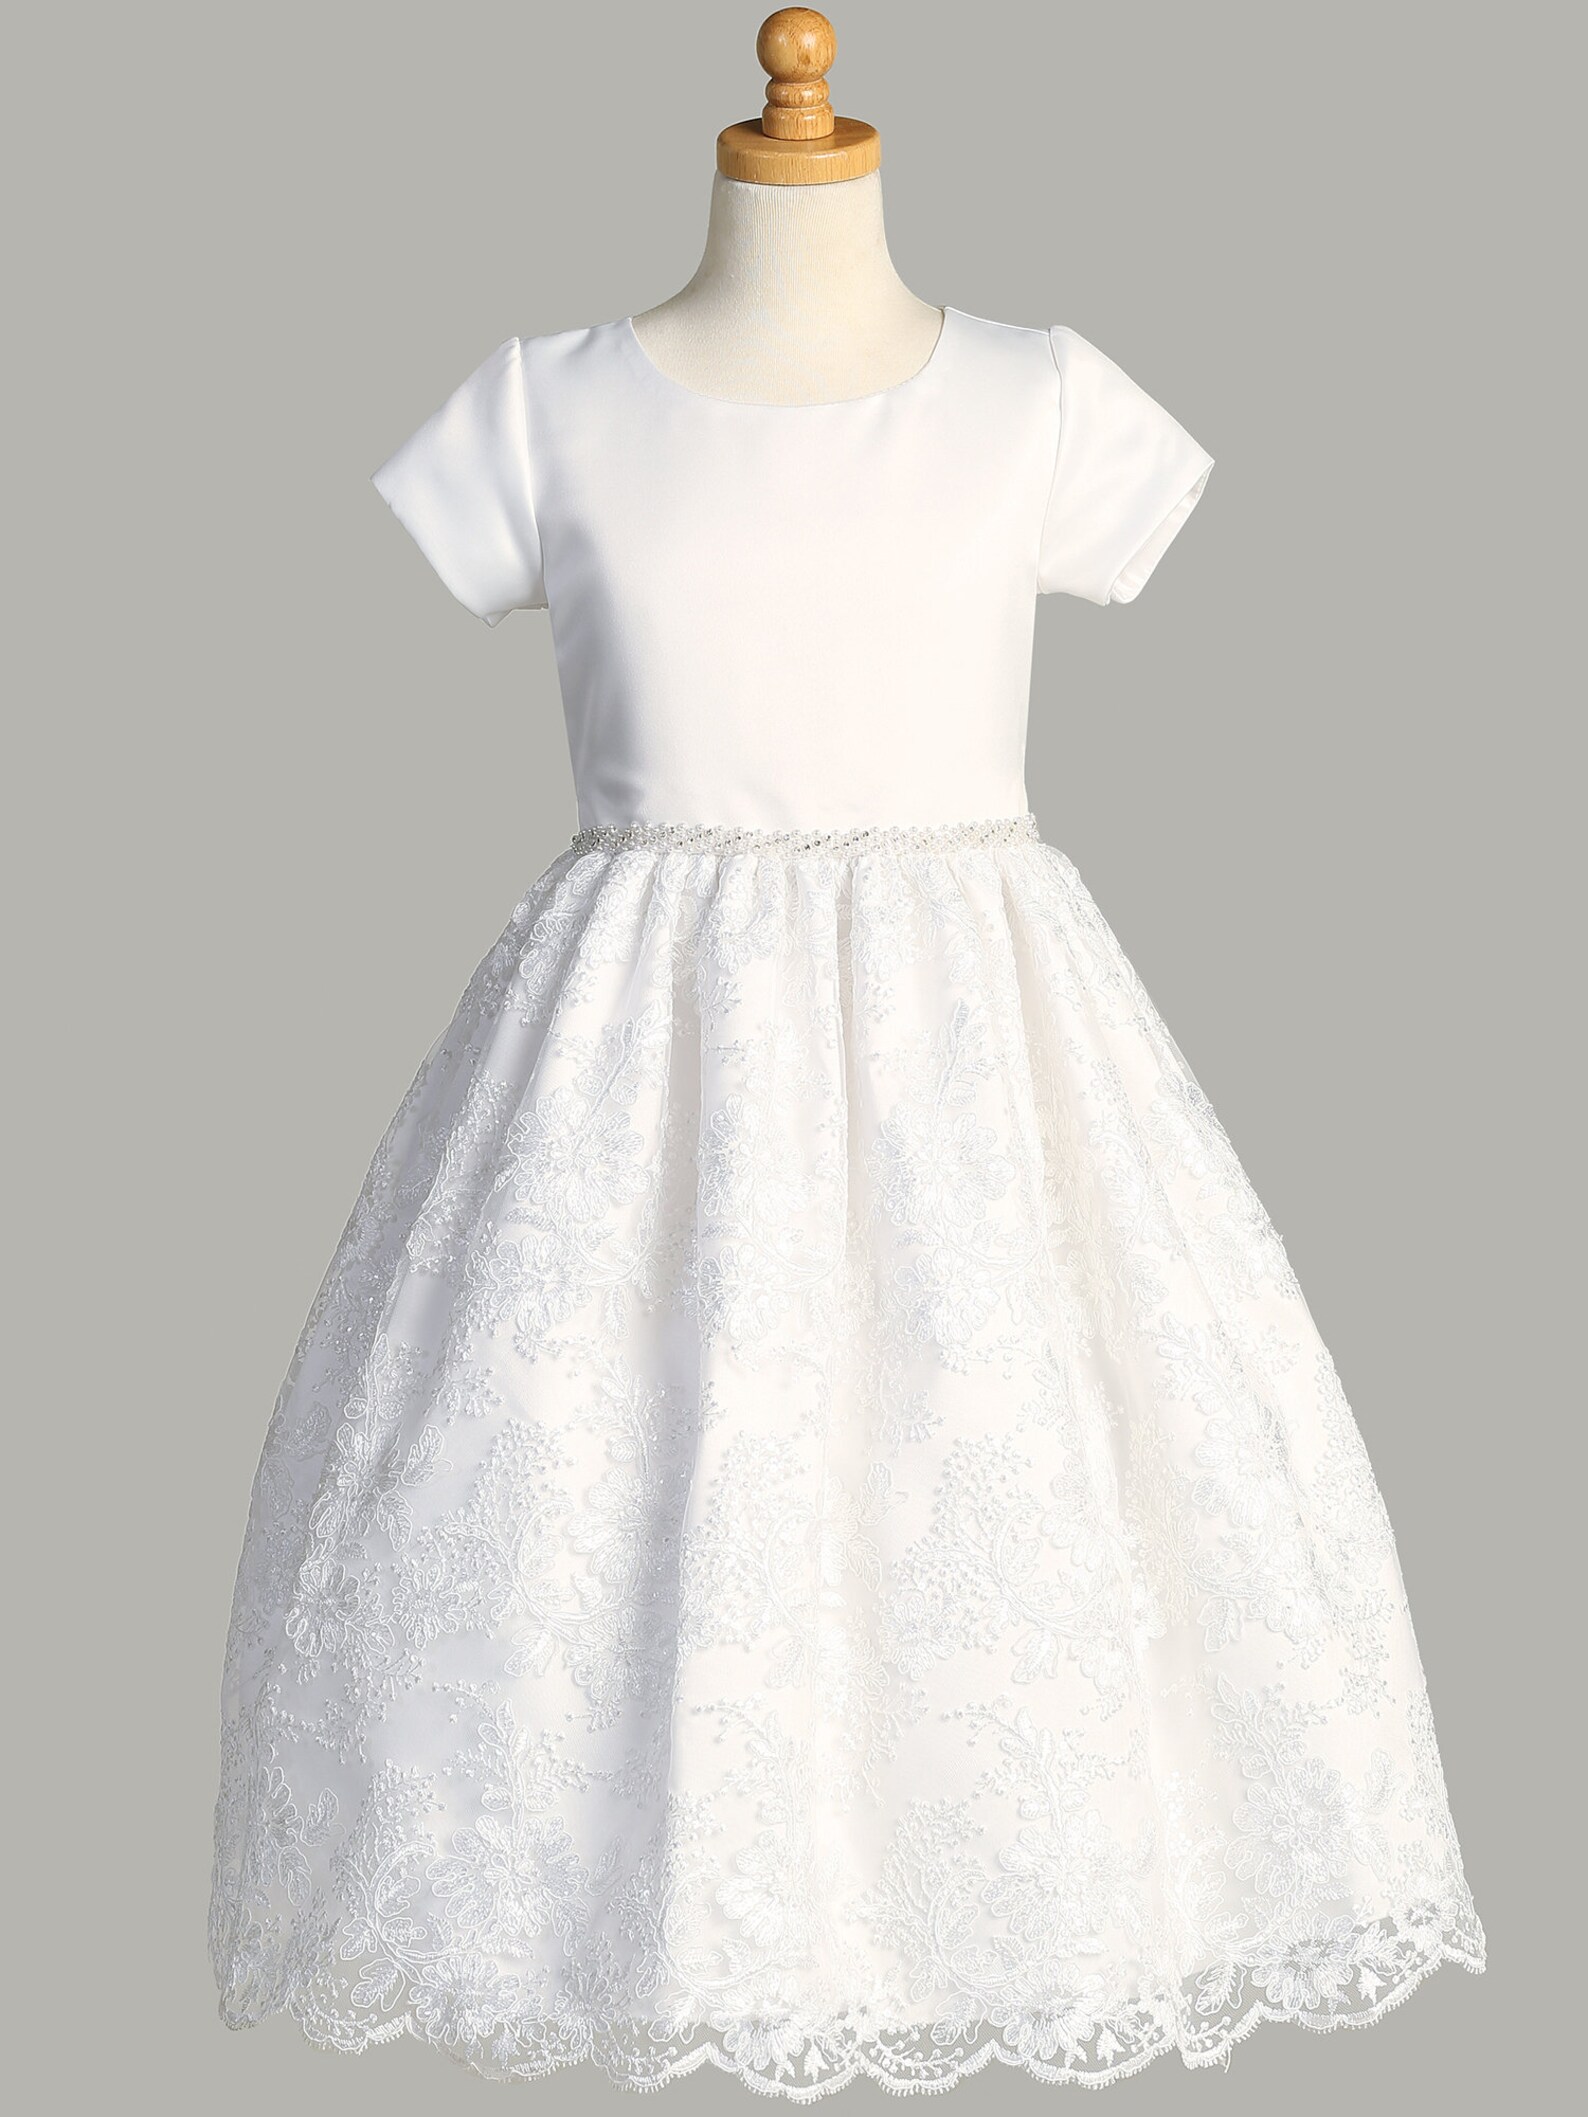 Girls White First Communion Dress Embroidered Tulle W/ Sequins - Etsy